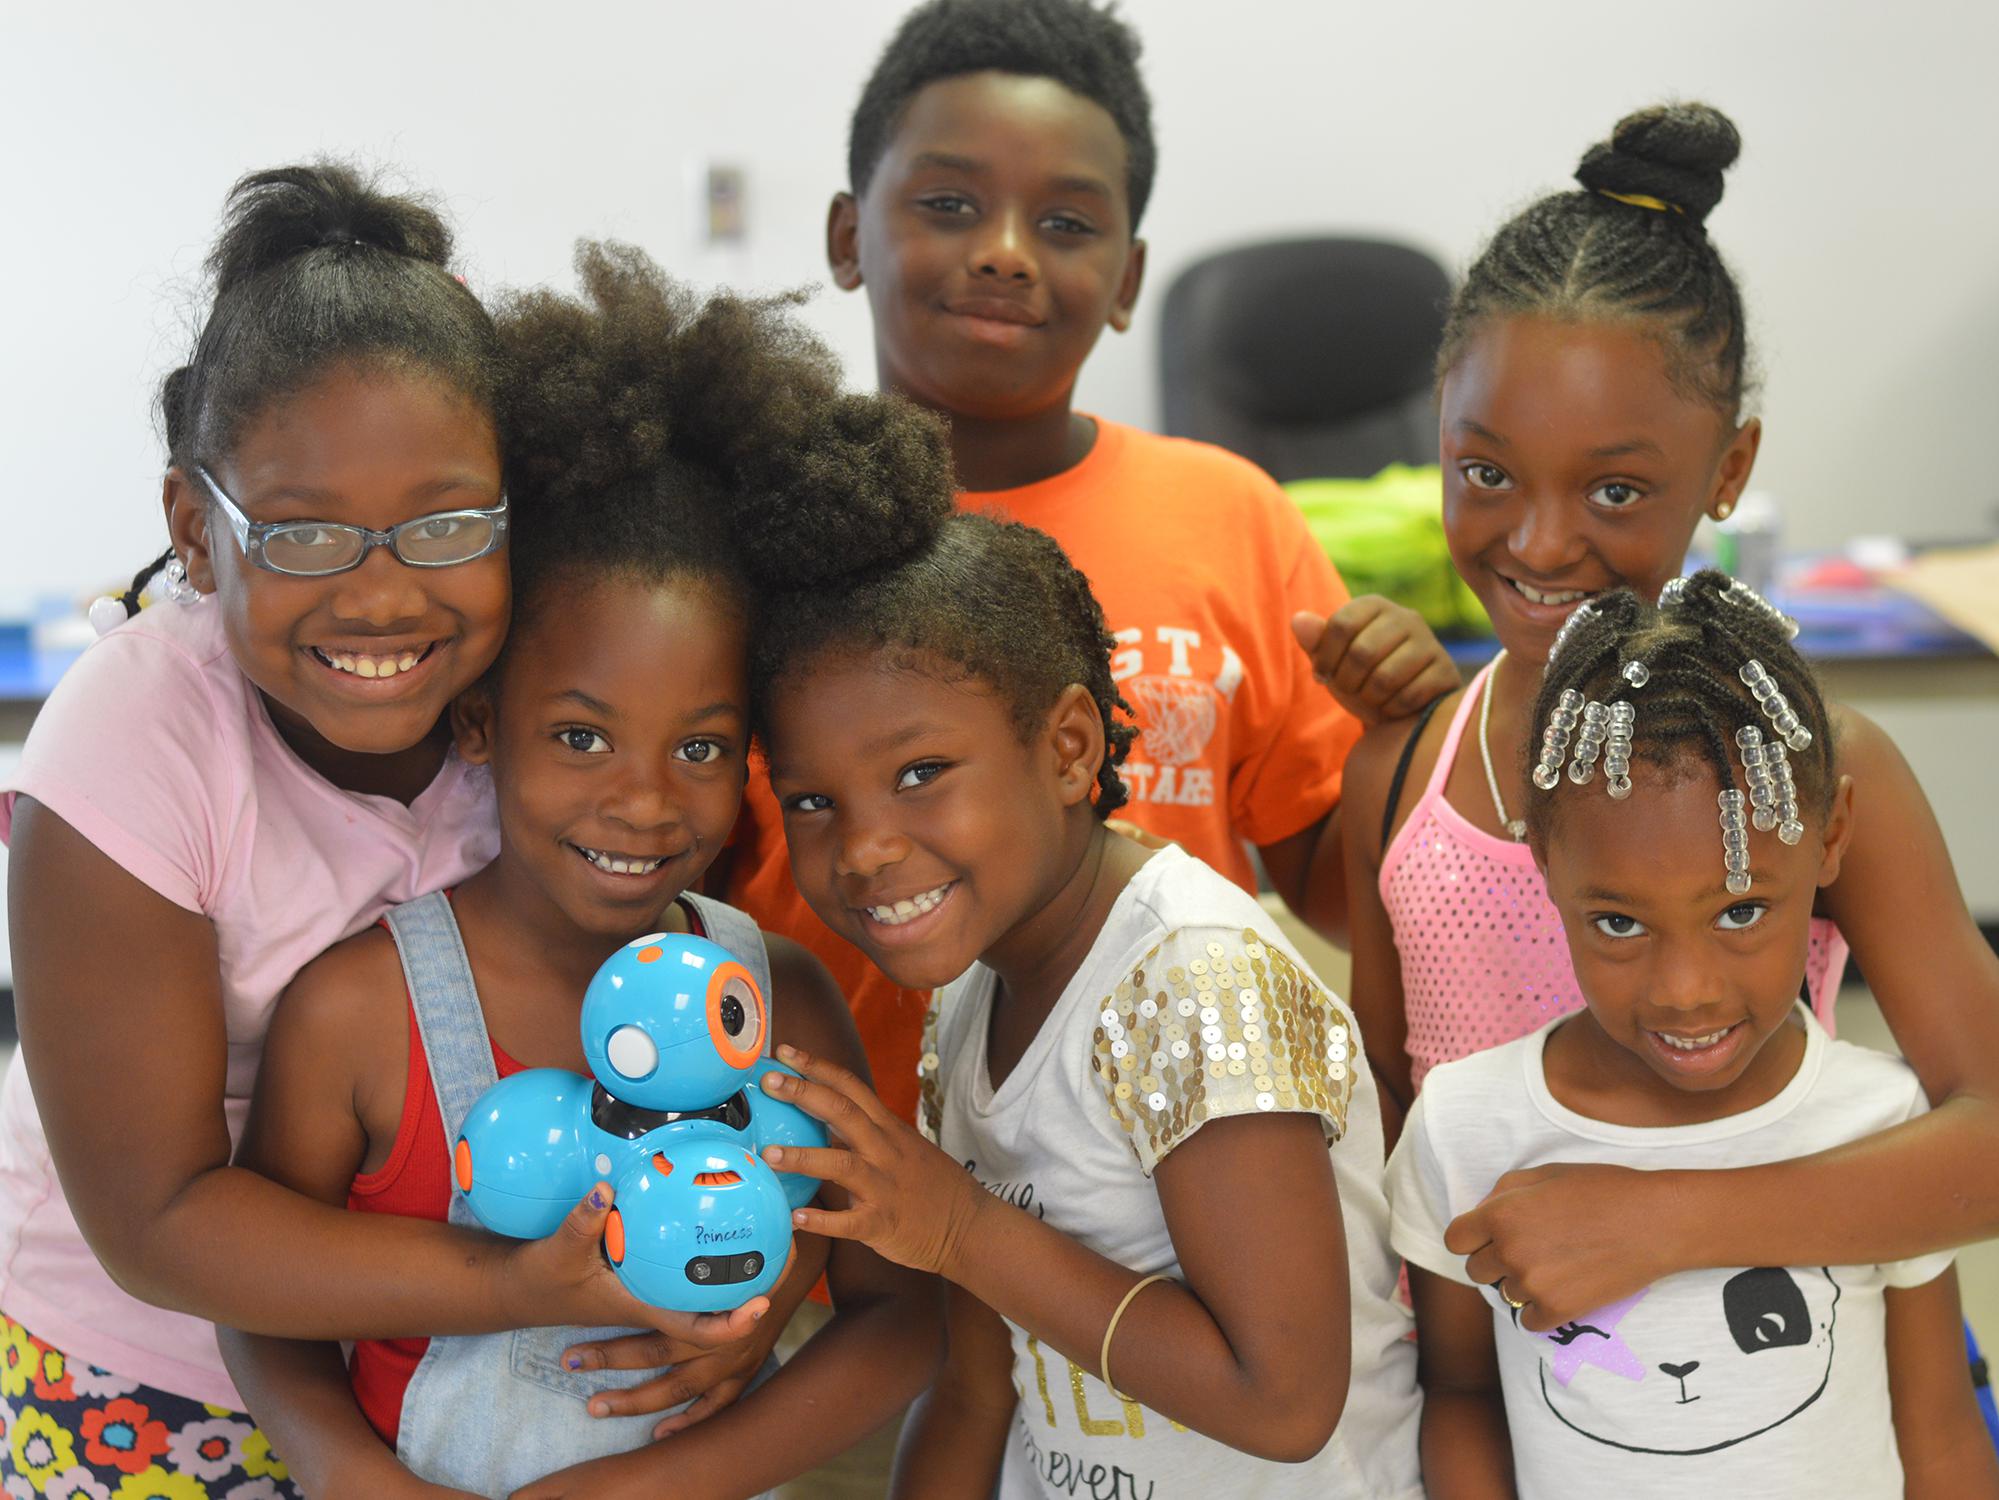 Campers (front row, from left) Jendiya Harkins, Jayda Robson, Ankeria Harkins and Morgan Peterson; and Travis Jones and Ceniyah Jamison learn robotics at a community summer camp on July 11, 2016 in Artesia, Miss. The Mississippi State University Extension Service and 4-H uses robotics to introduce children to science, technology, engineering and mathematics programs at an early age. (Photo by MSU Extension Service/Michaela Parker)